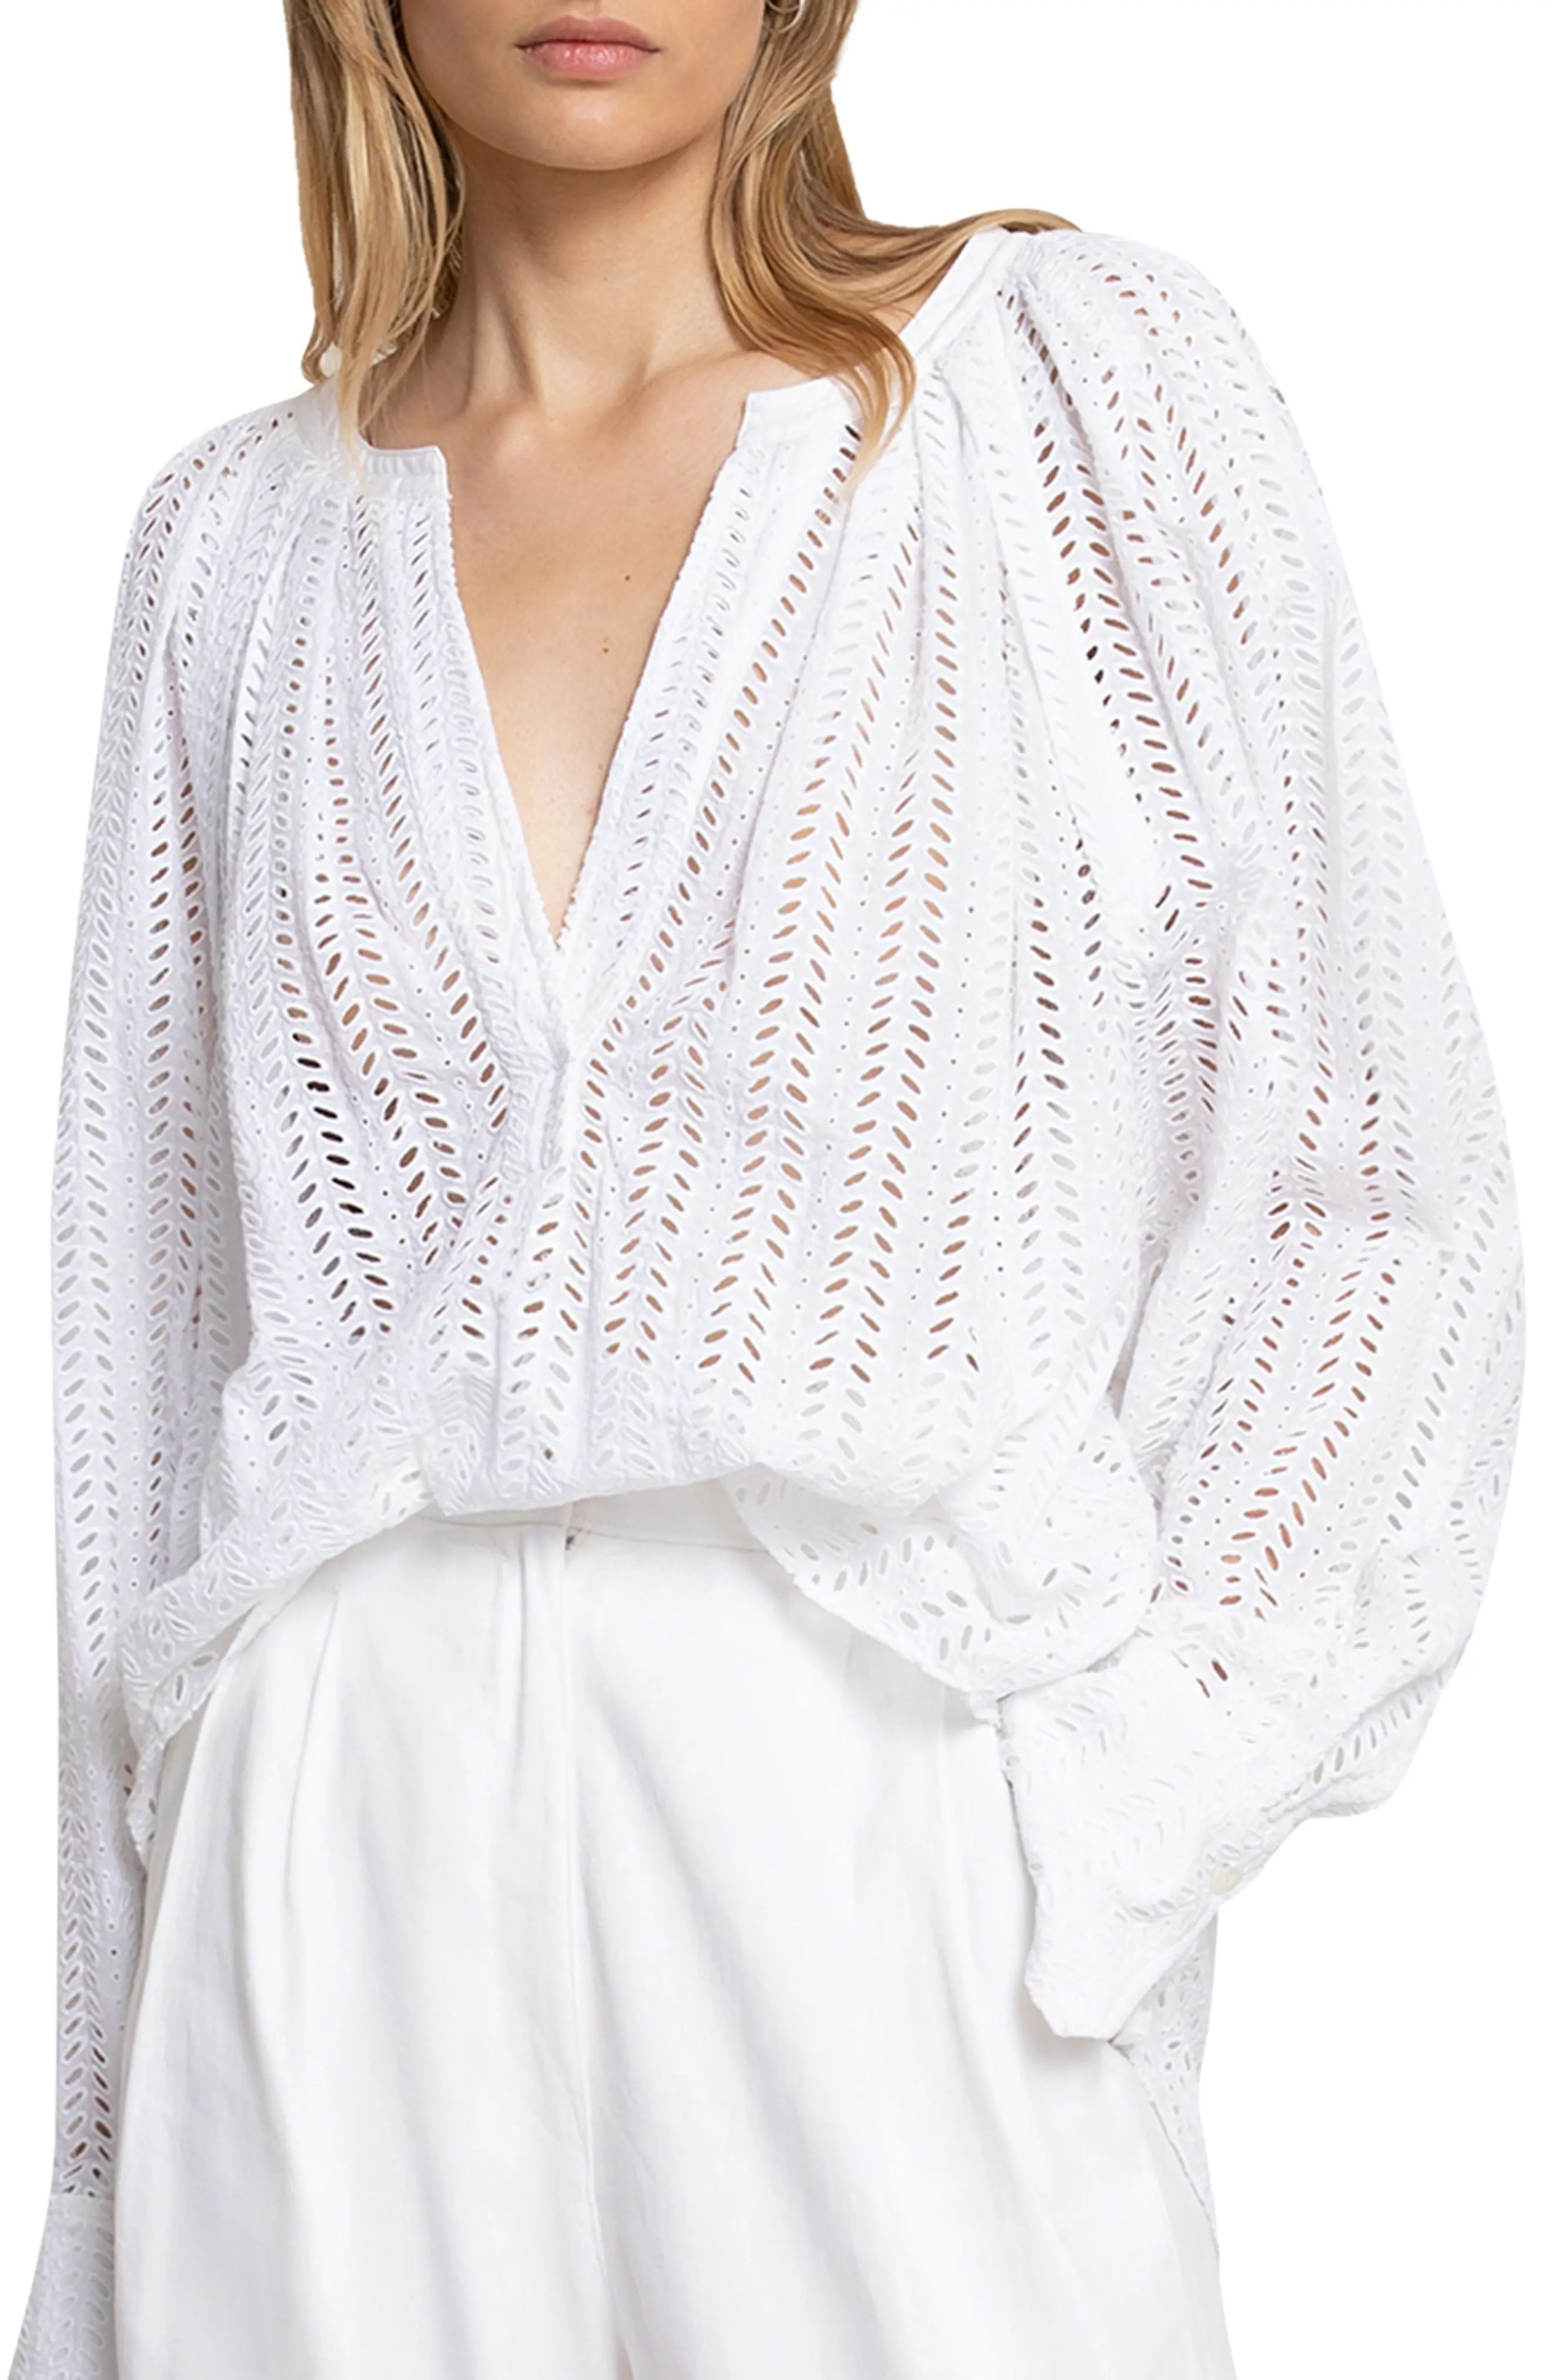 A.L.C. Nomad Long Sleeve Cotton Eyelet Blouse in Off White at Nordstrom | Nordstrom